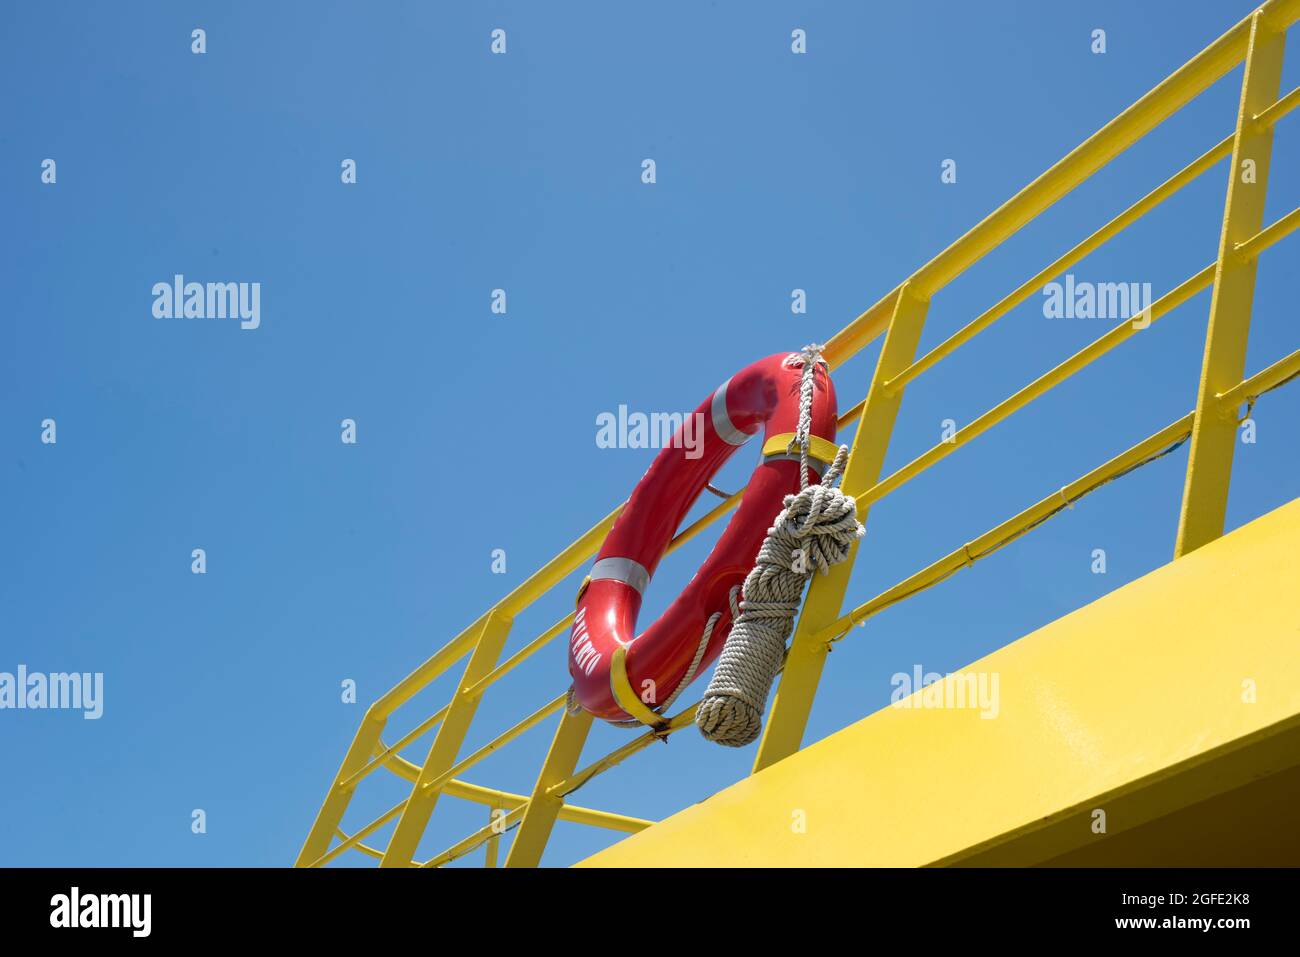 A lifebuoy ring with rope at the back of ferry boat - Travel and shipping safety background Stock Photo